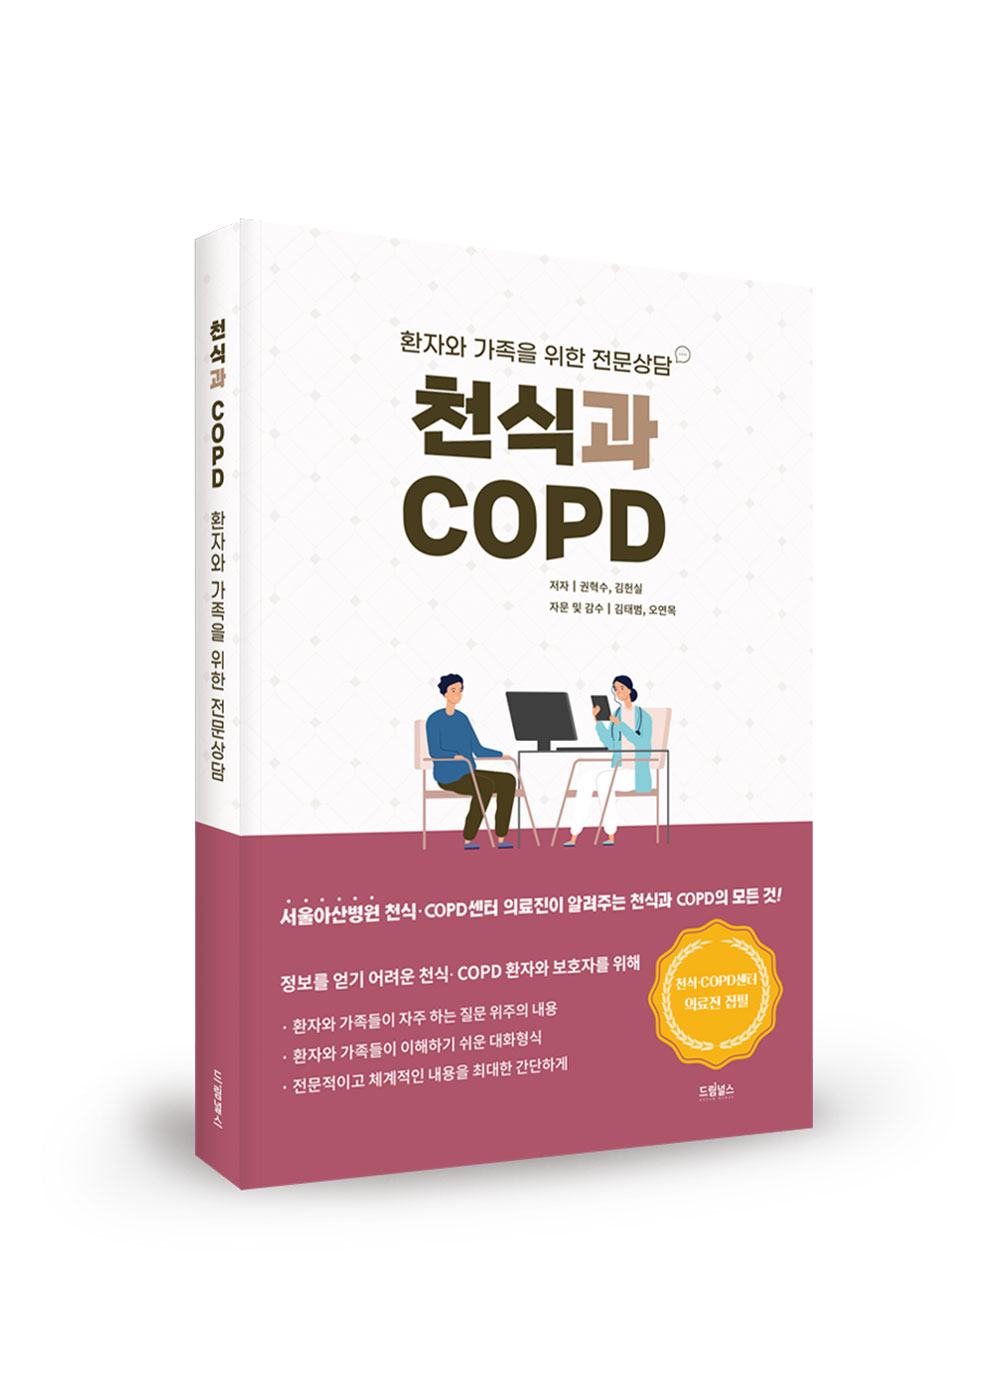 Asthma and COPD - Professional Counseling for Patients and Families